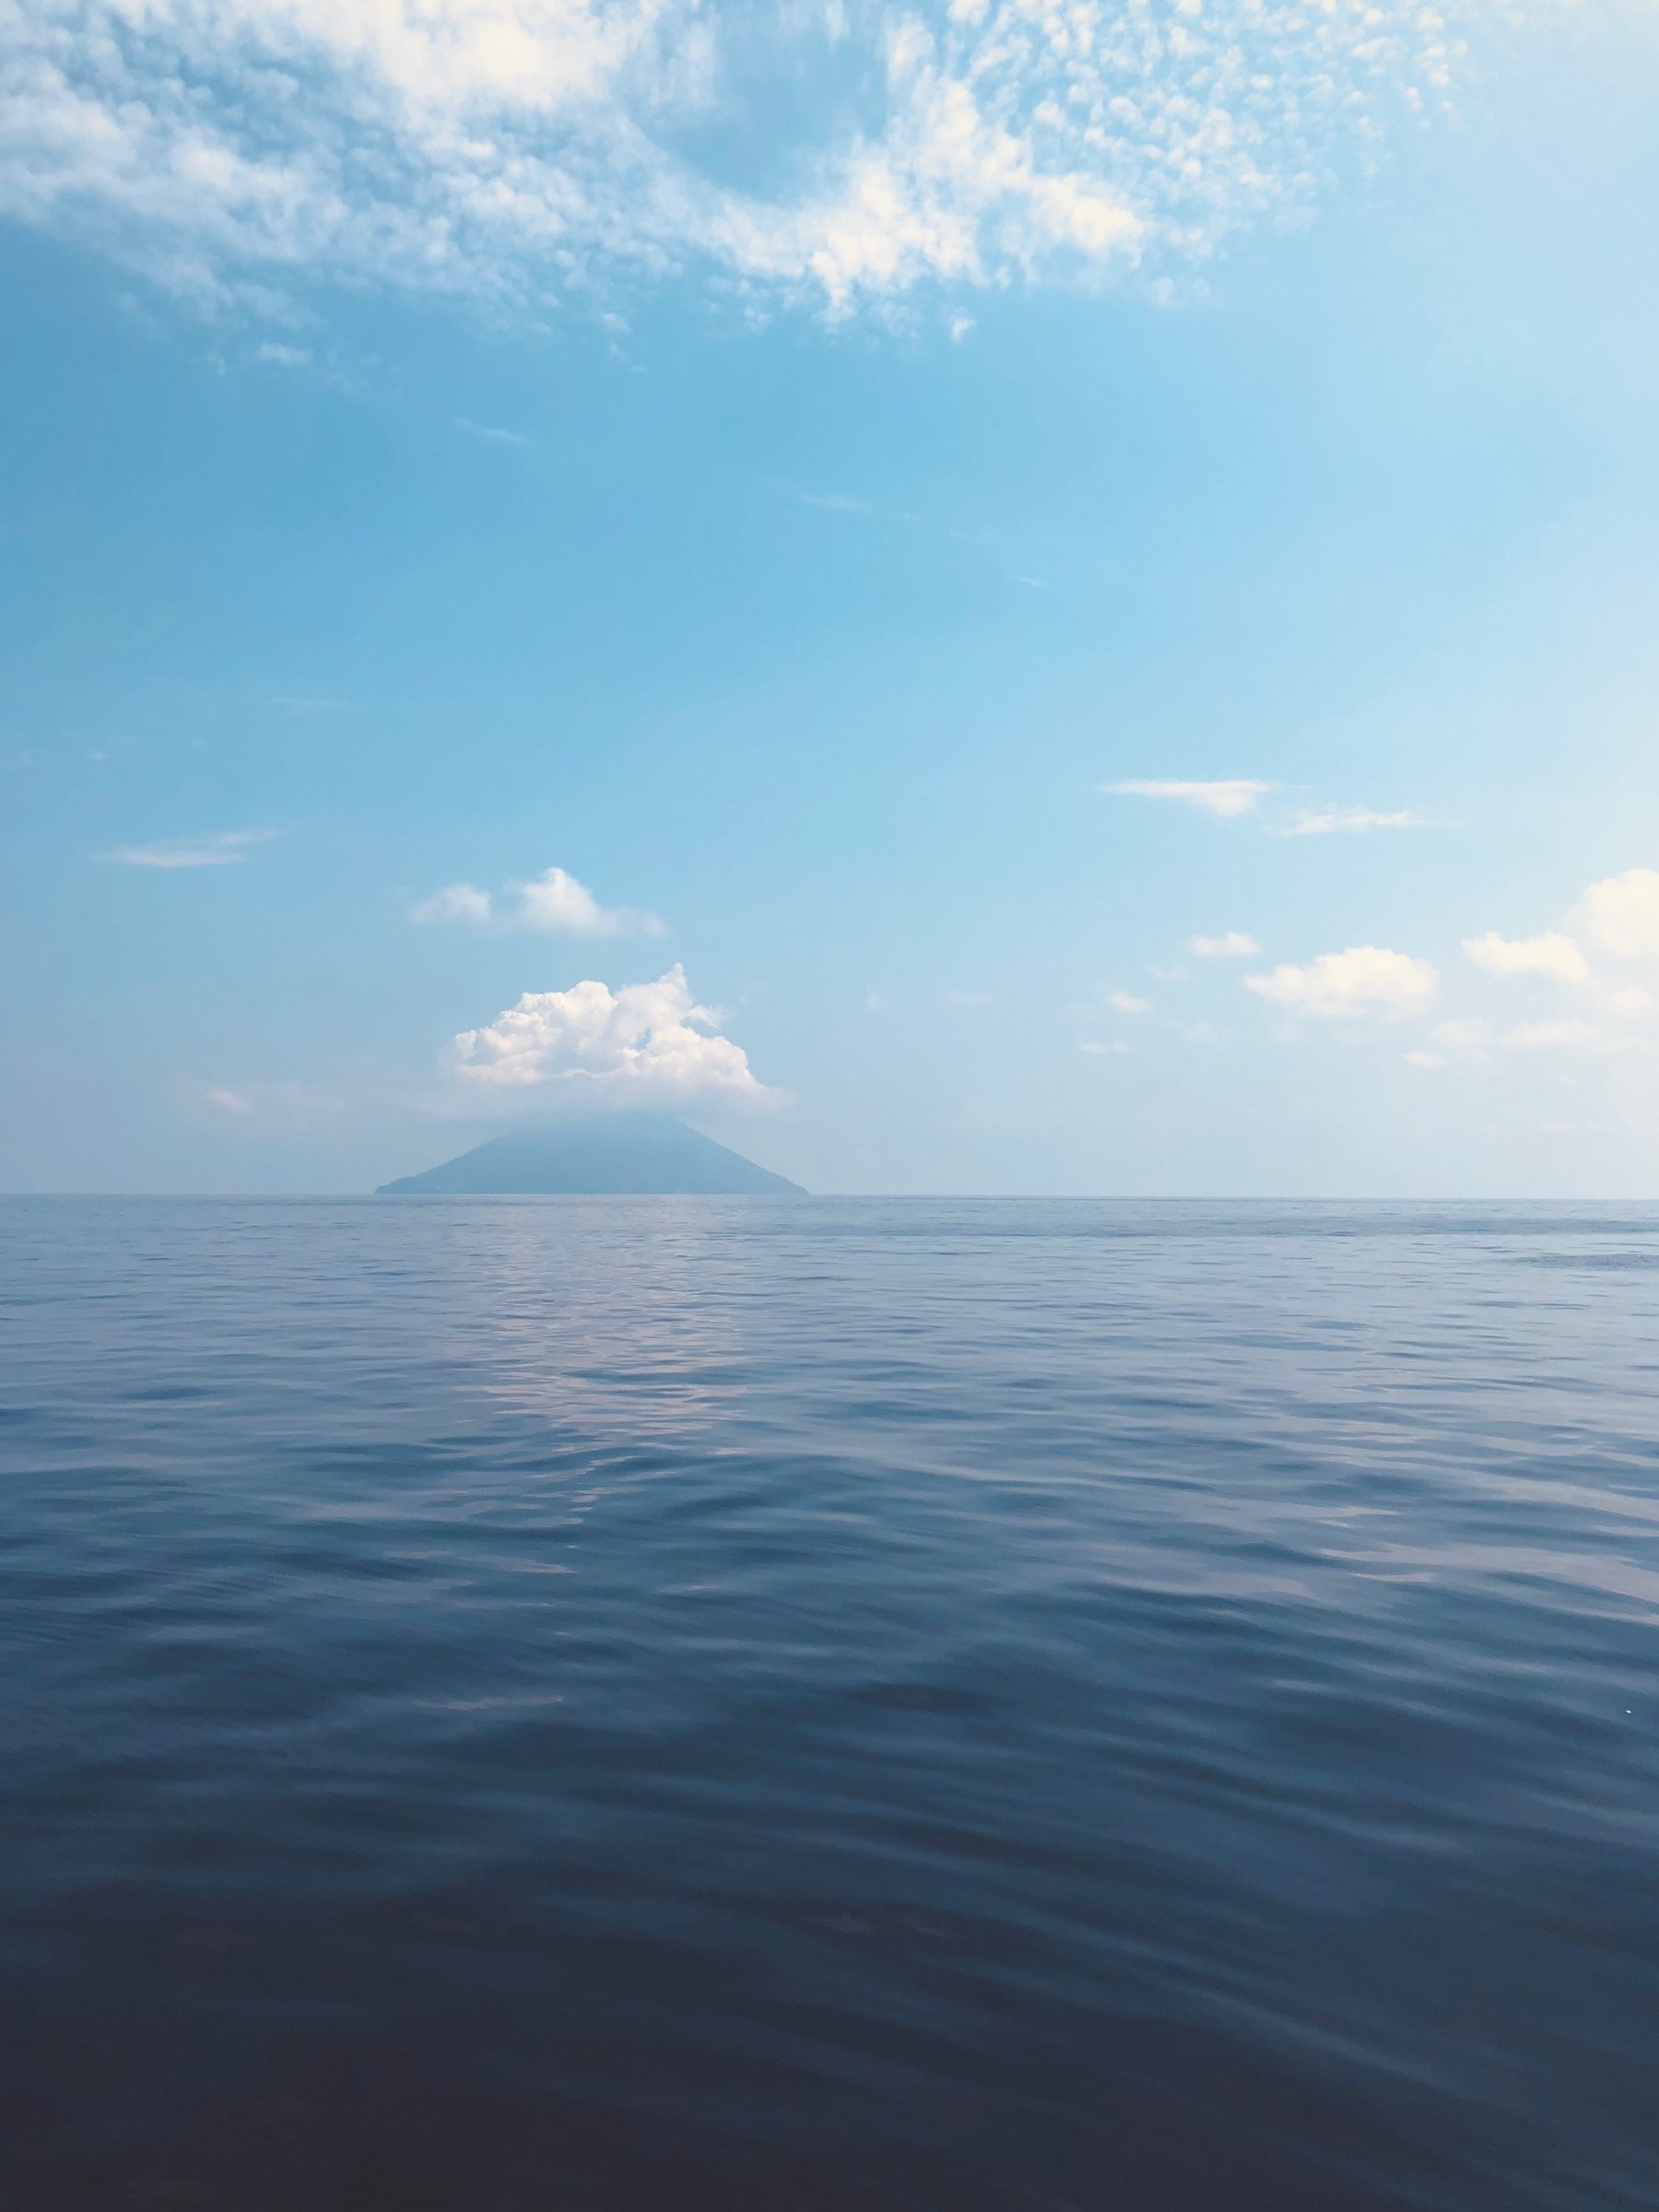 A calm blue ocean stretches to the horizon where clouds obscure the crater of Stromboli.